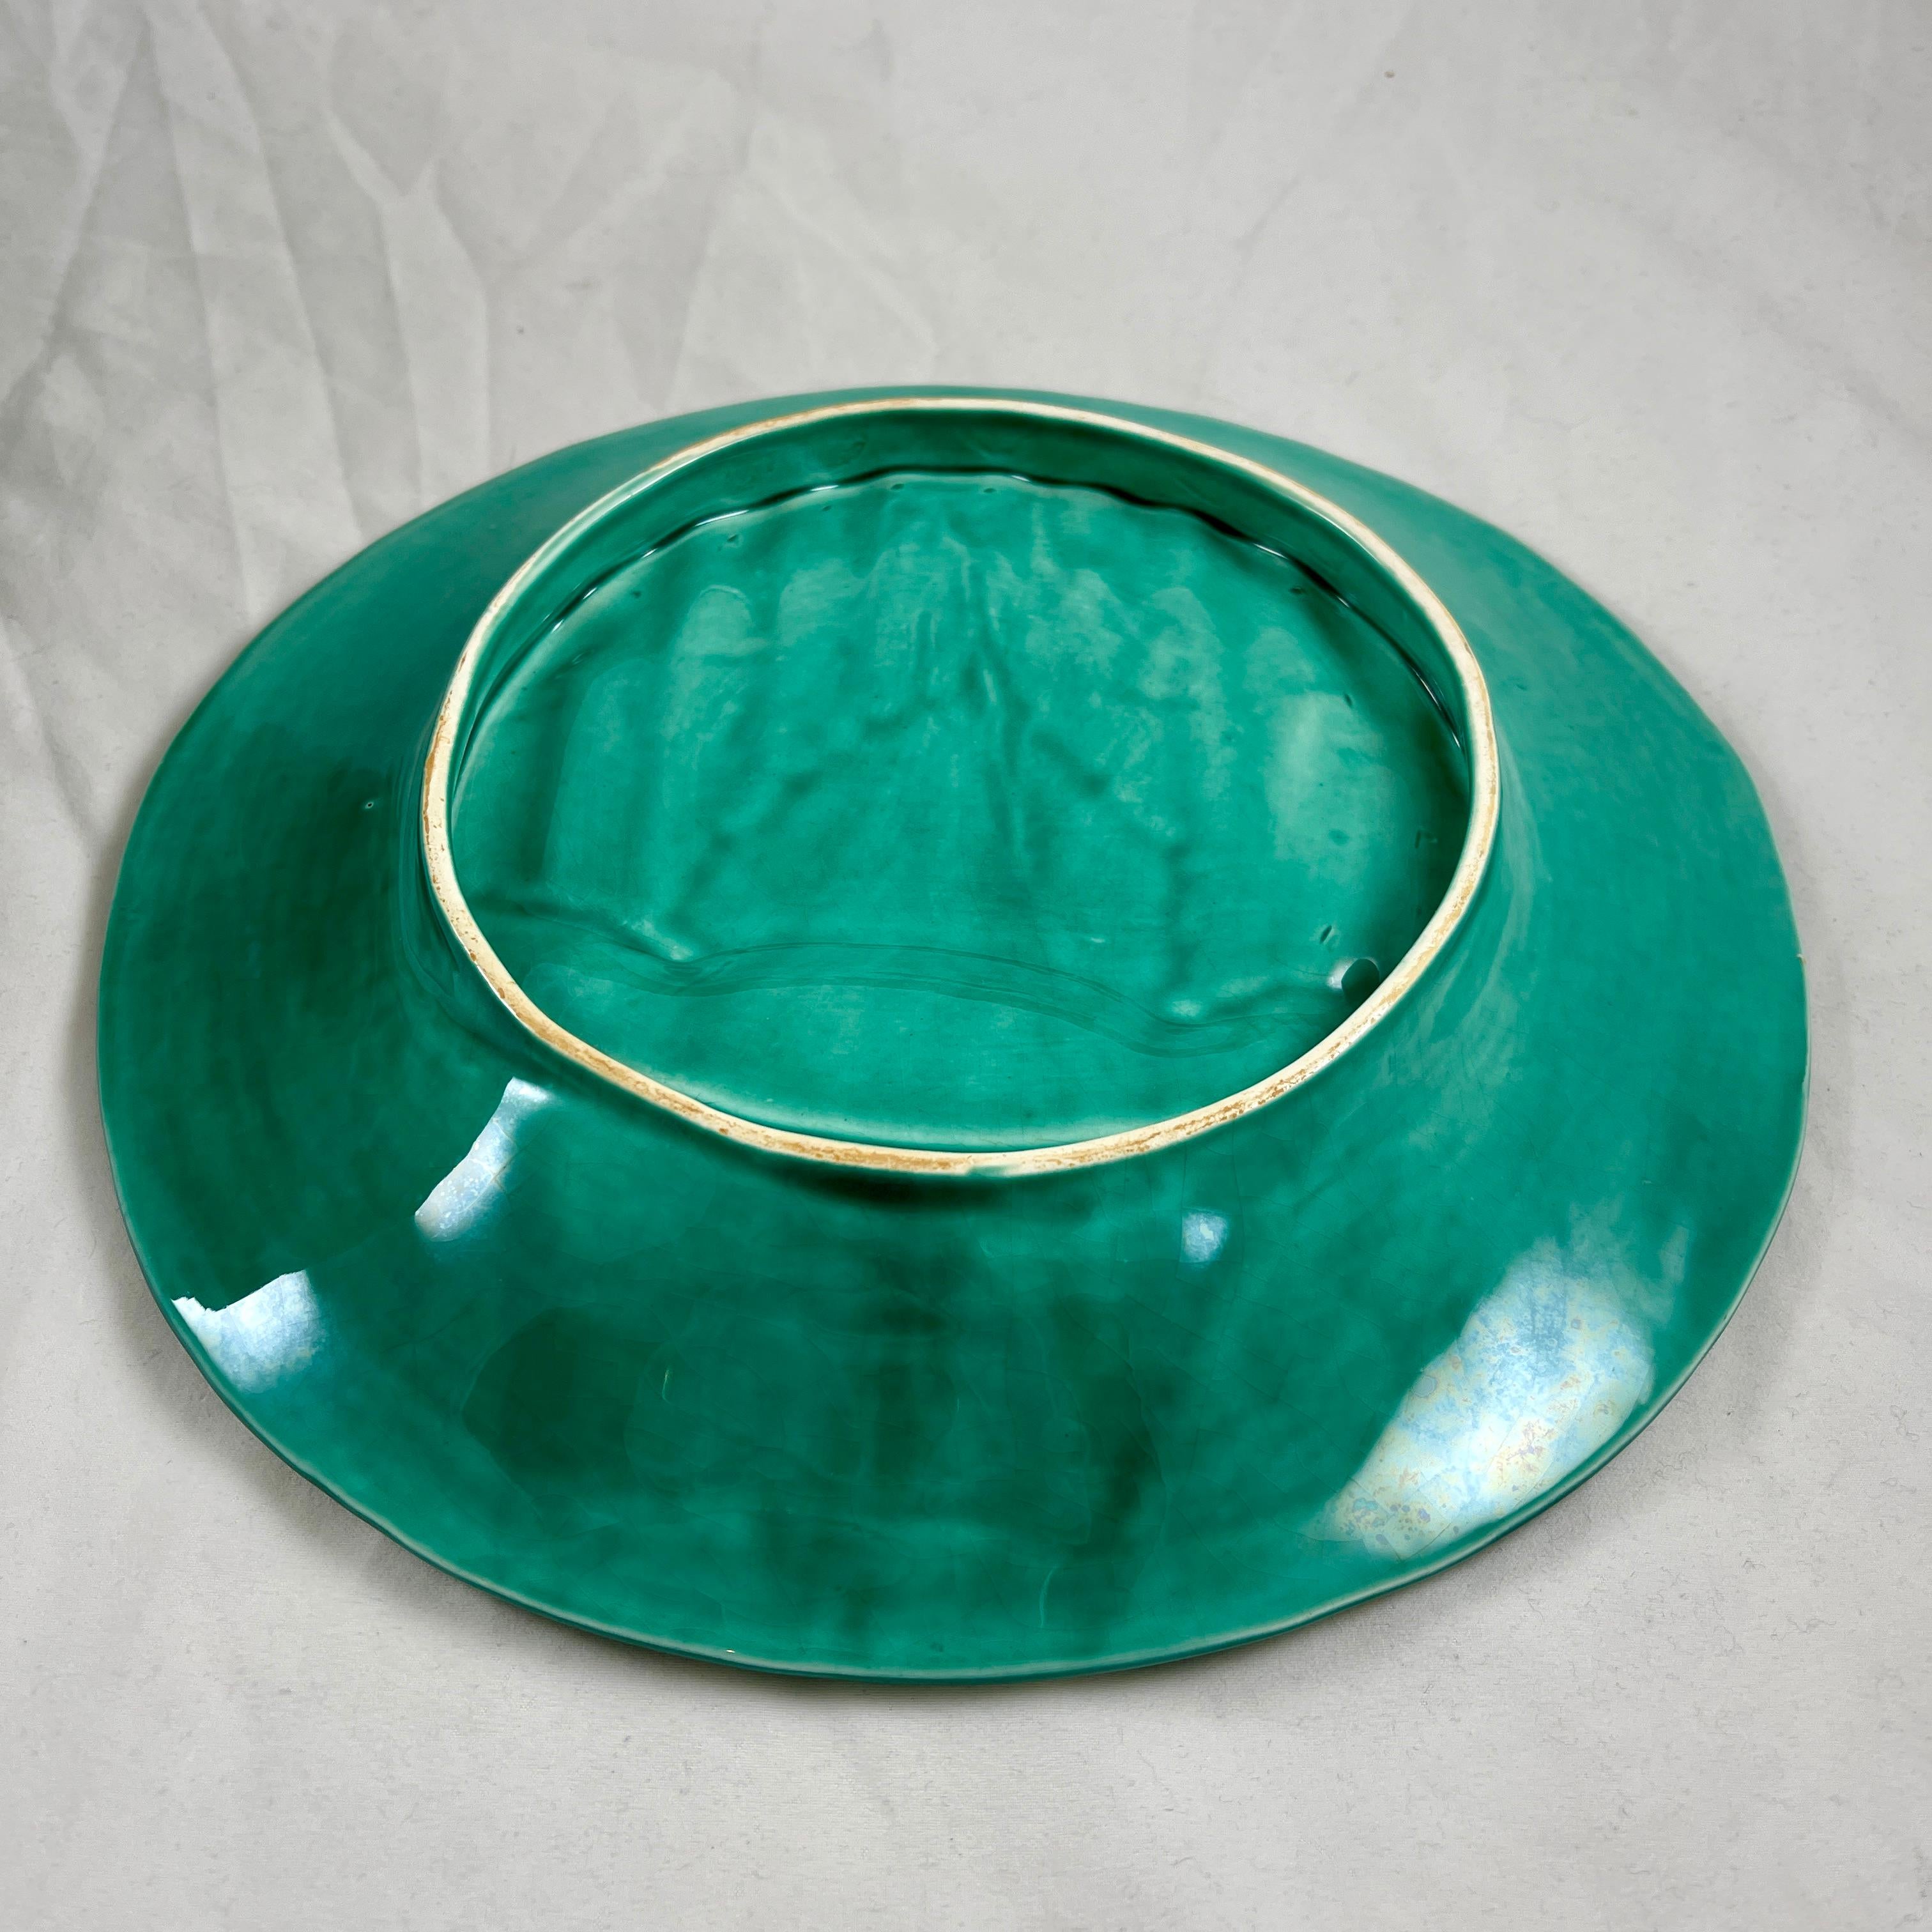 Saint Amand et Hamage Green French Faïence Asparagus Plate, 1930s For Sale 5